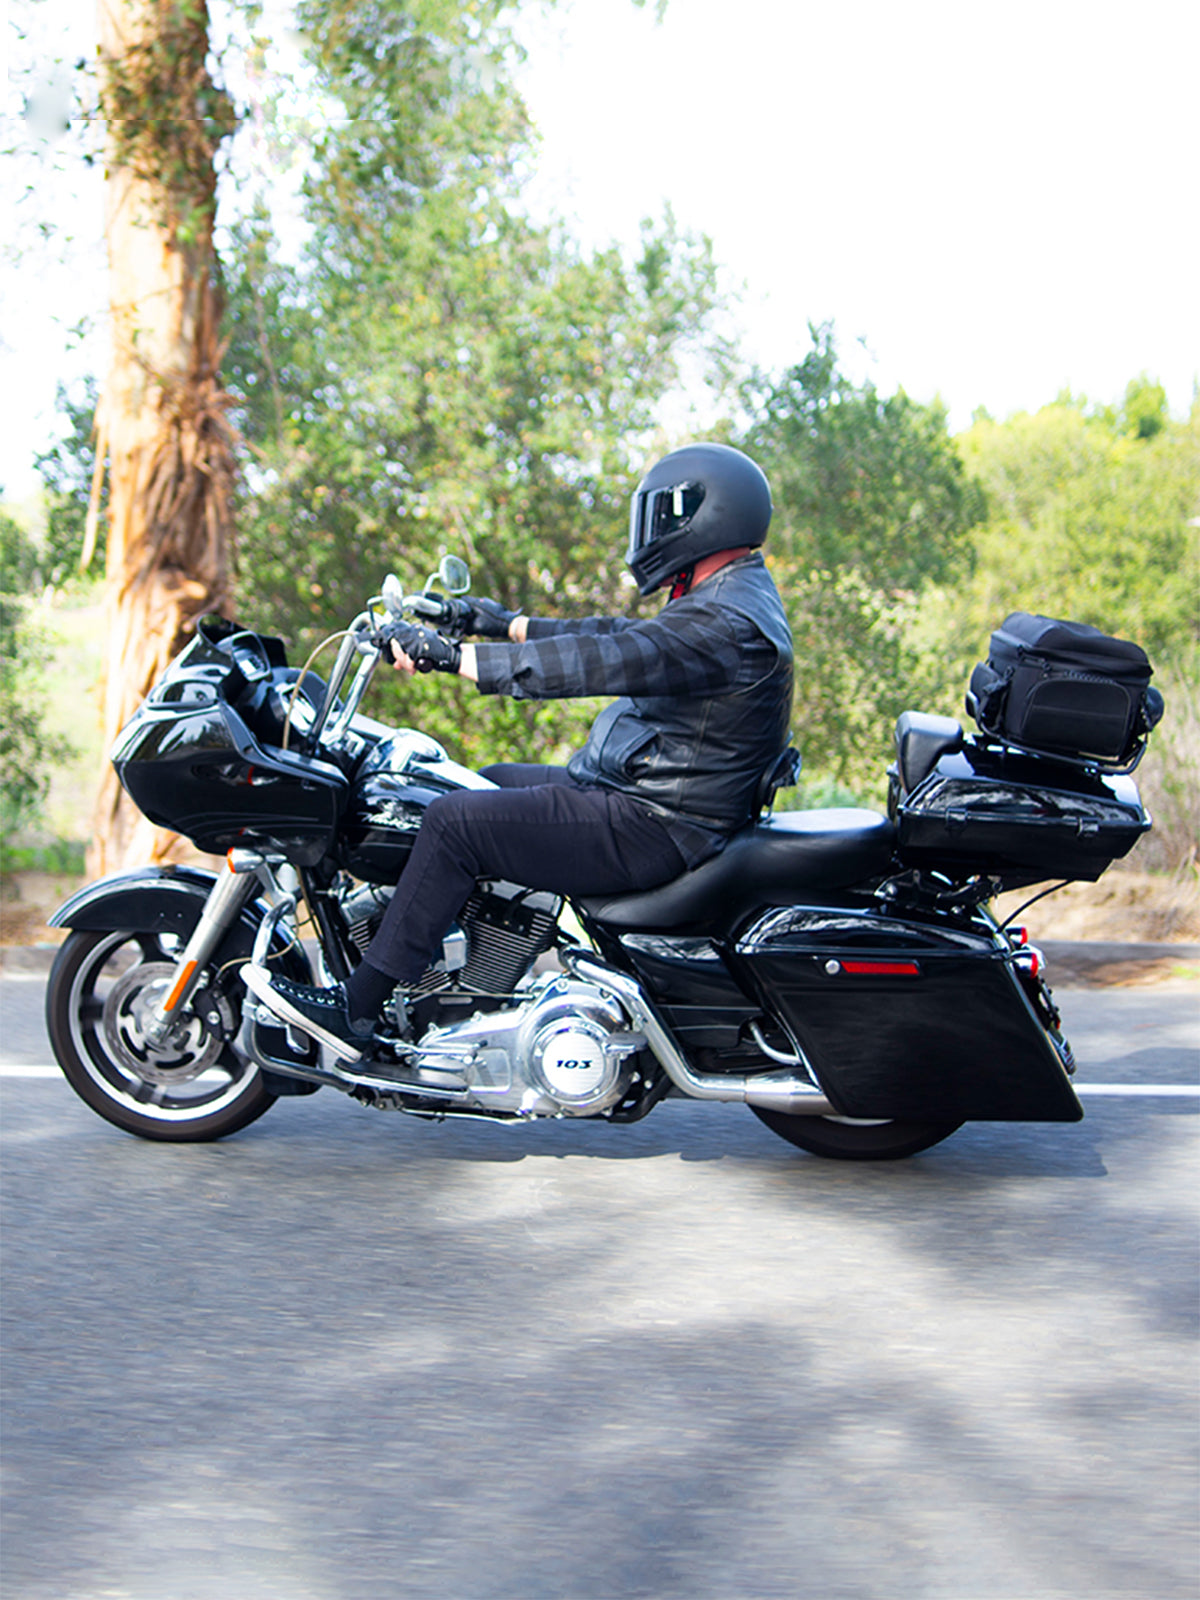 Tail Bags for Motorcycles